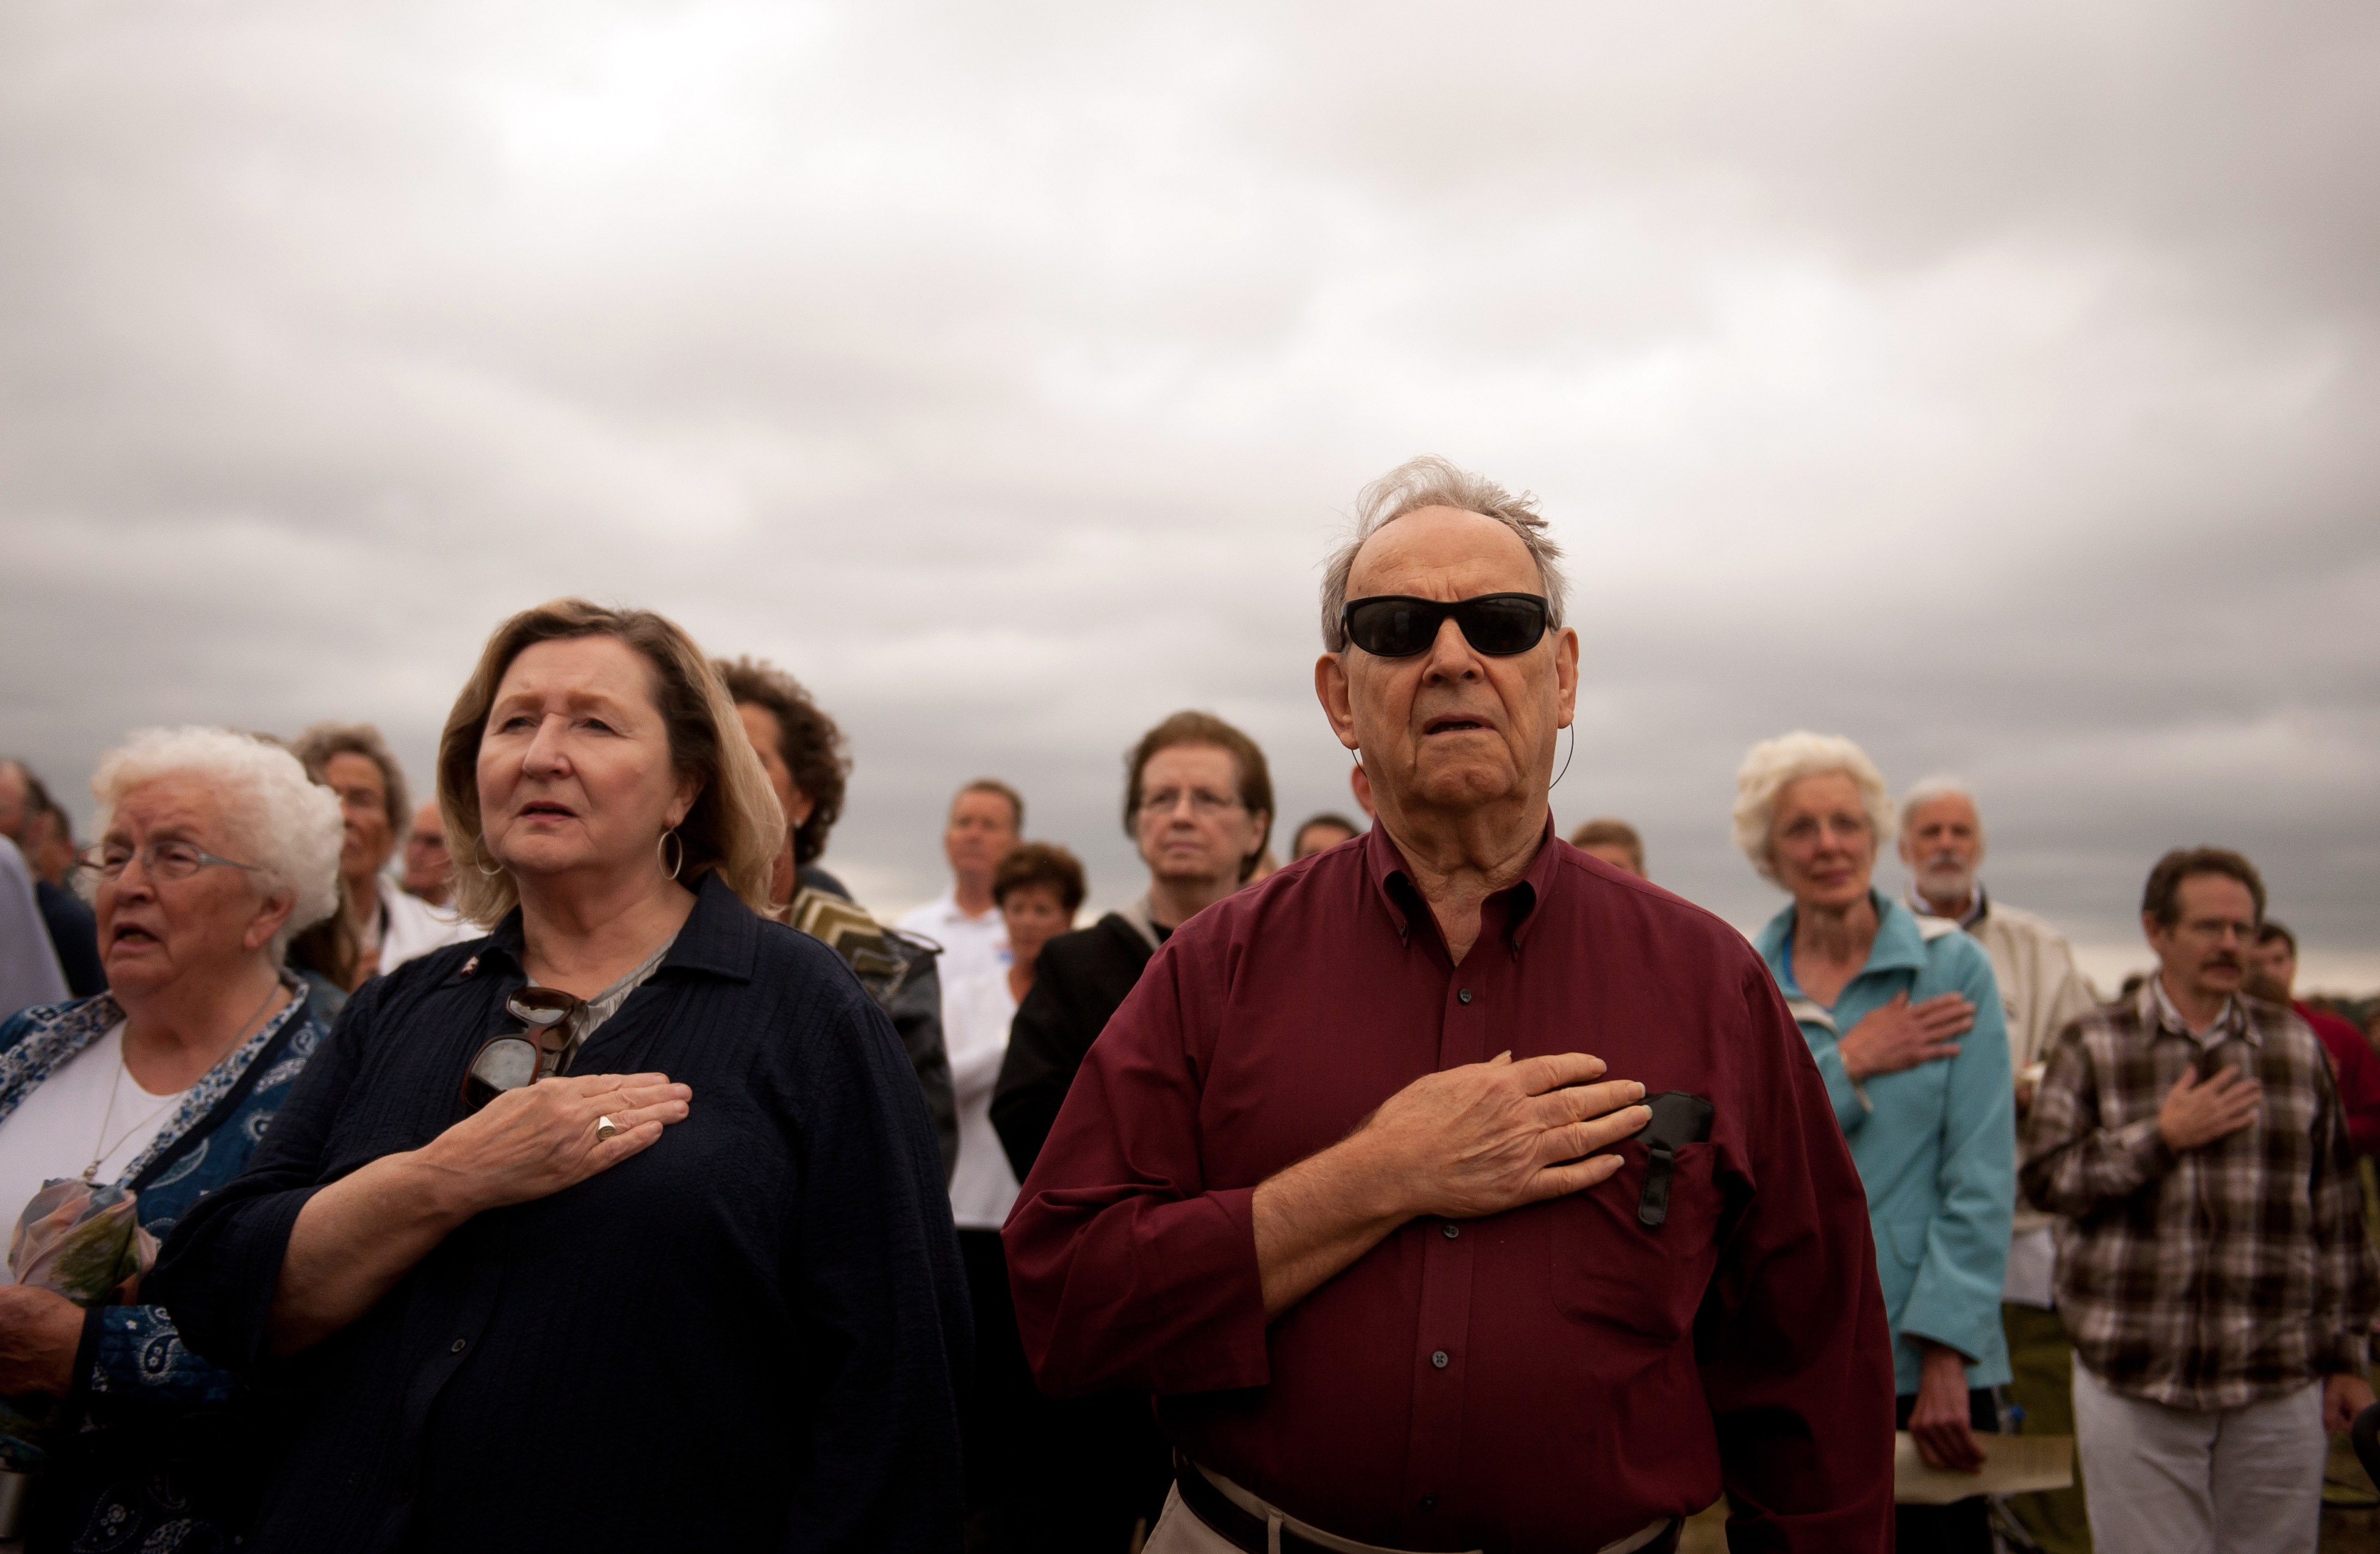 People gather during 13th anniversary ceremonies commemorating the September 11th attacks at the Wall of Names at the Flight 93 National Monument September 11, 2014 in Shanksville, Pennsylvania. (Photo by Jeff Swensen/Getty Images)